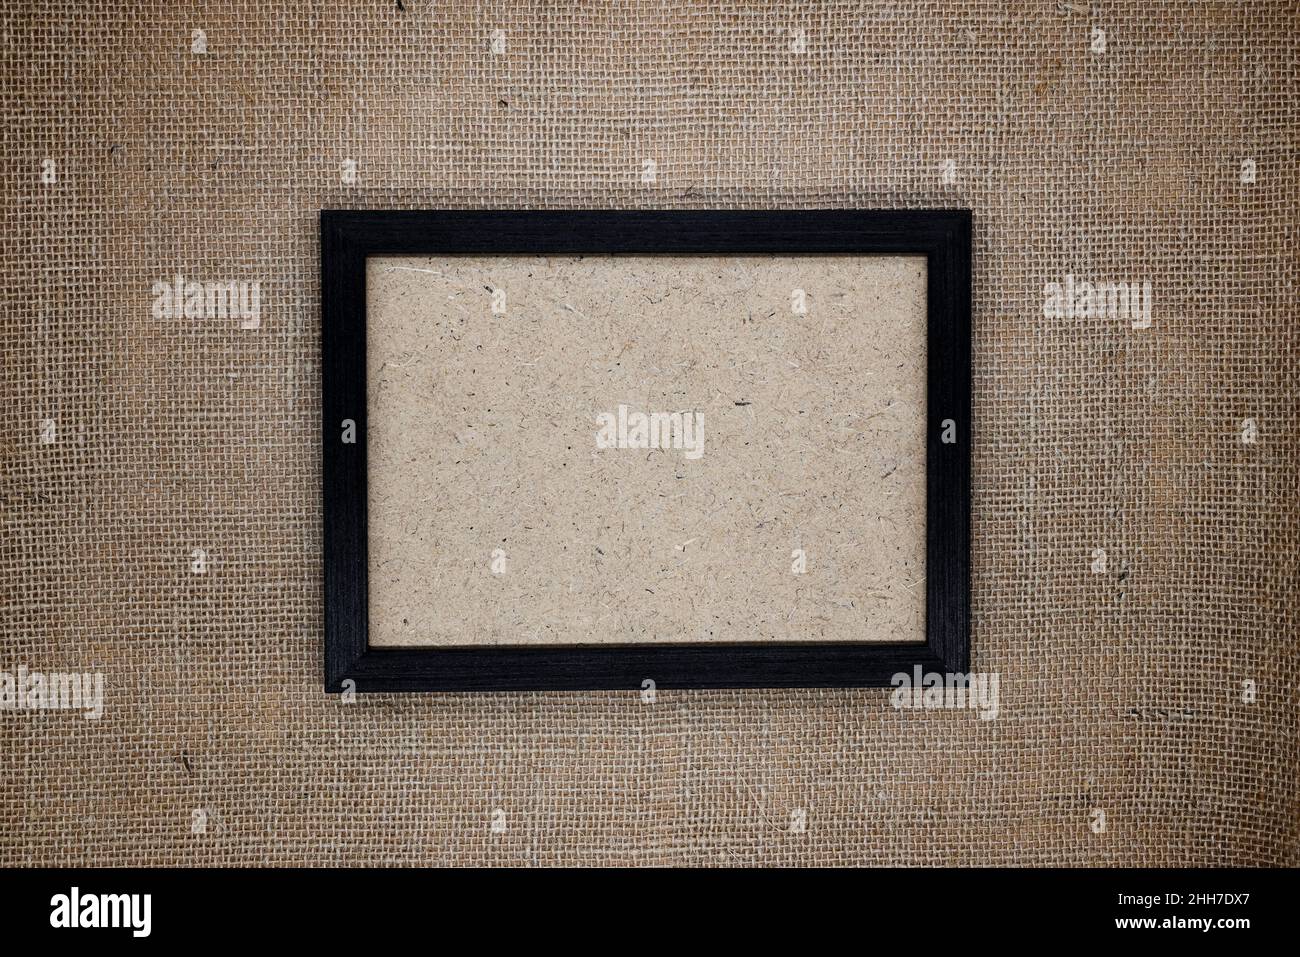 Mockup, сomposition from natural materials, eco concept. Dark brown wooden frame on burlap. Inside the frame is a wooden fiber base. Stock Photo